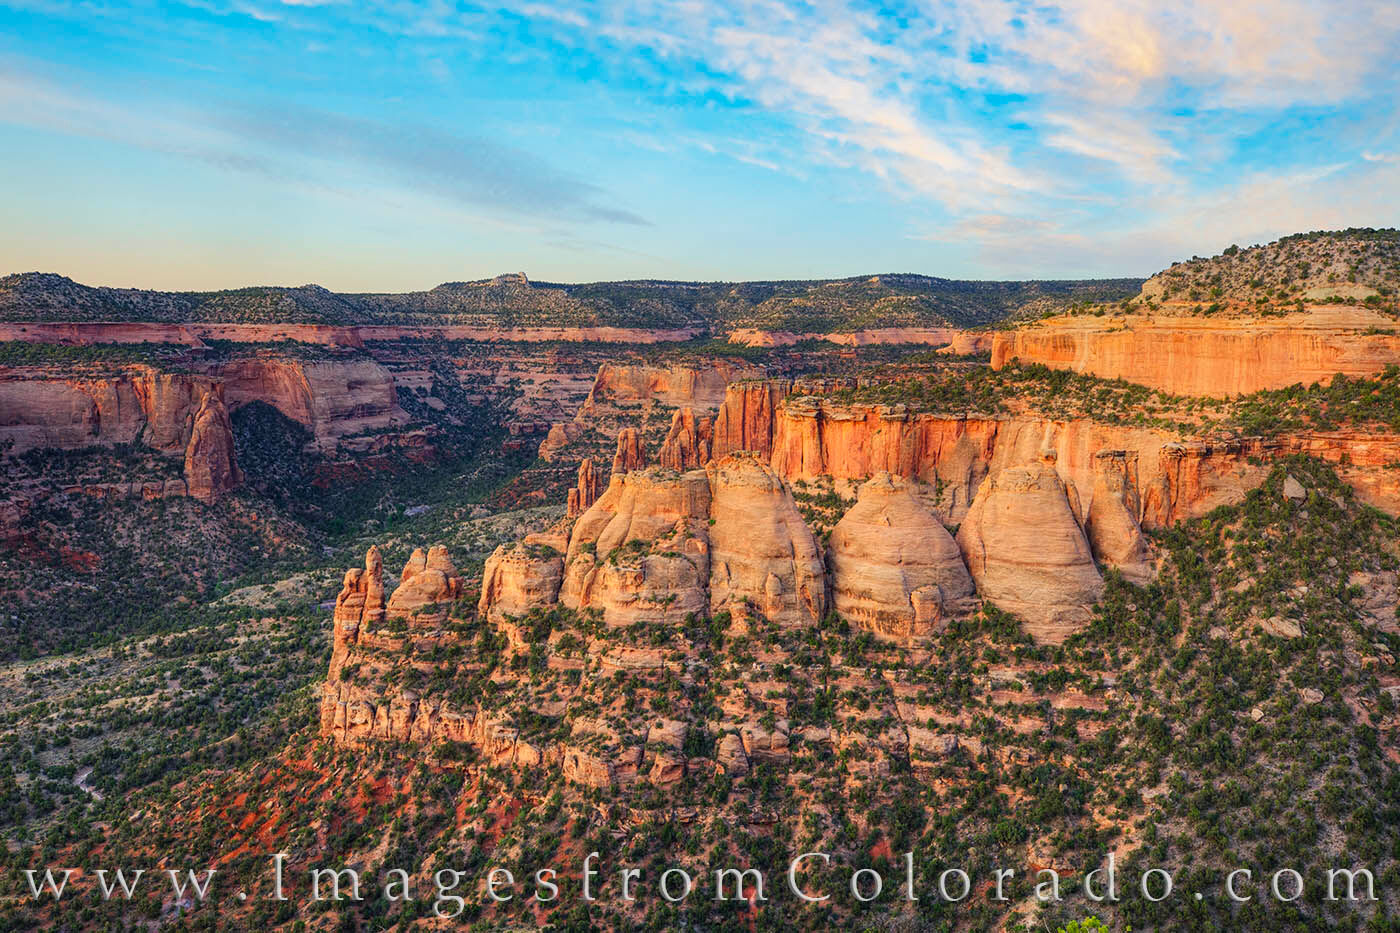 Just before sunrise, the soft pastel skies of western Colorado awaken over Colorado National Monument. This photograph shows...